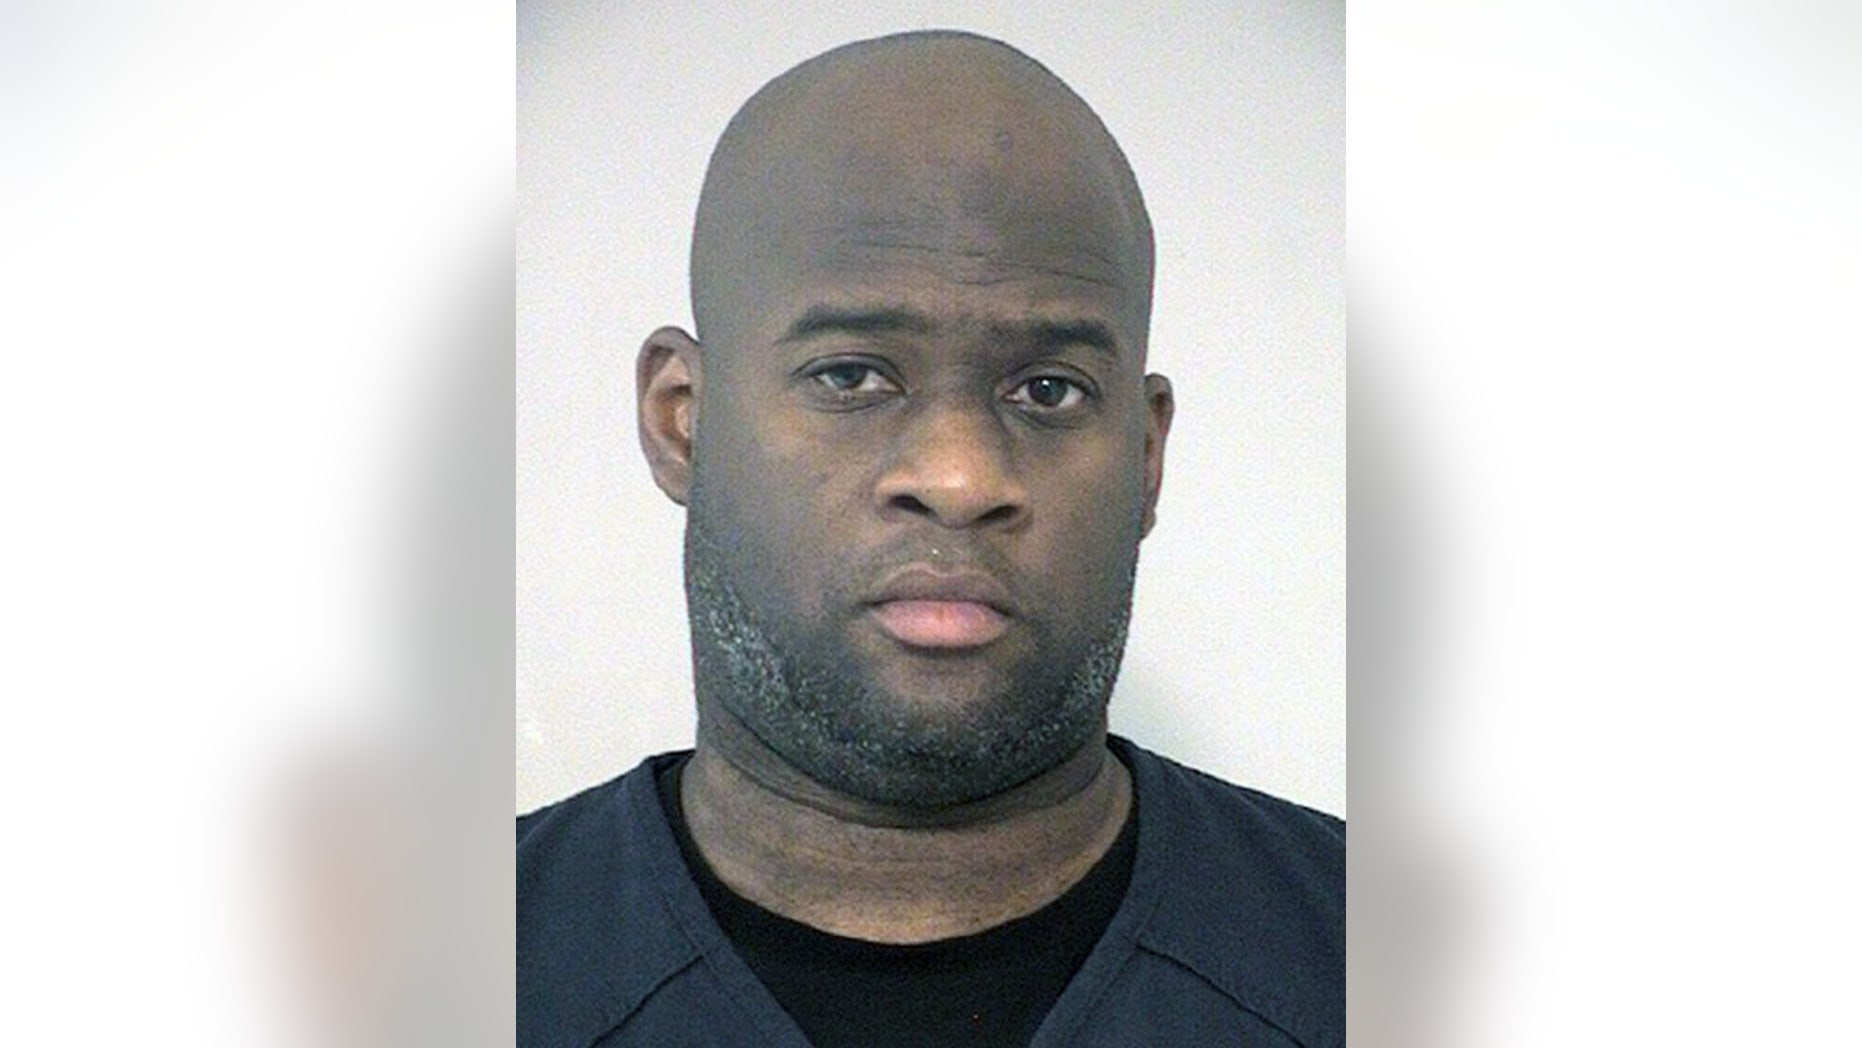 Former Texas, NFL player Vince Young arrested on DWI charges